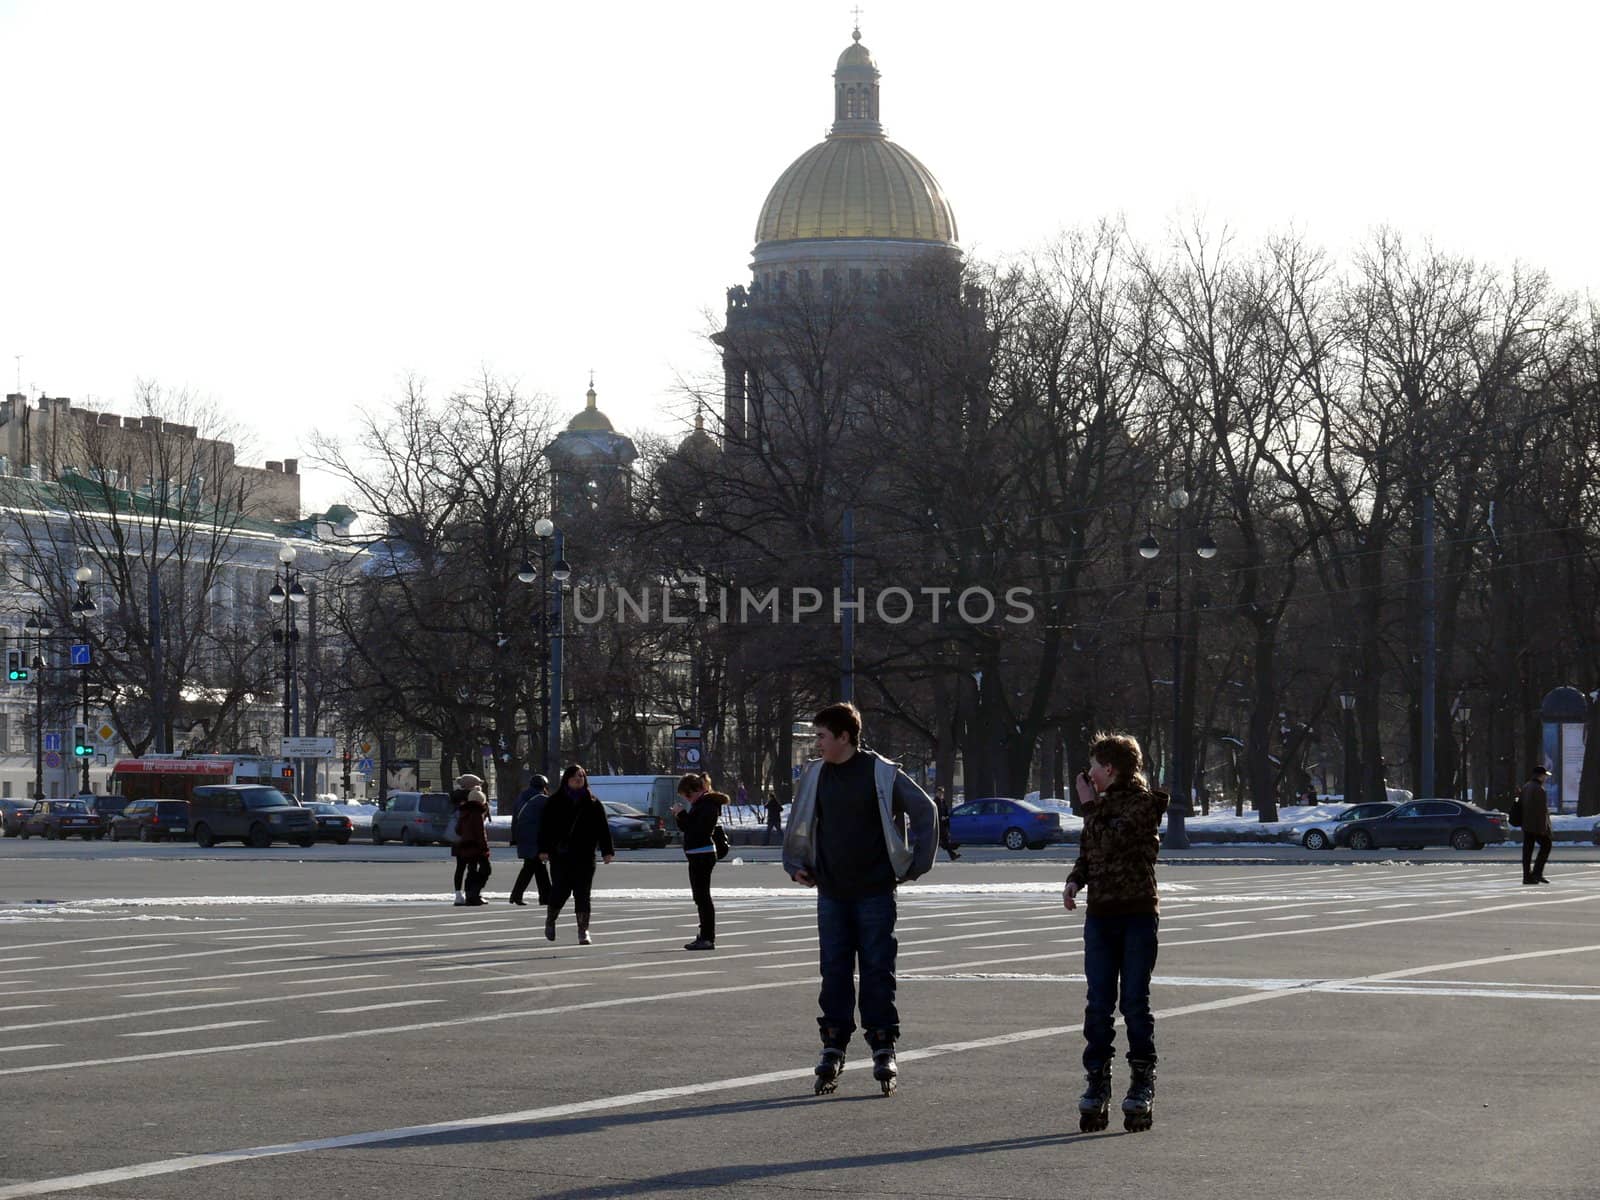 Saint-Petersburg, Russia - March 25, 2010: Peoples near Isaac temple in spring day on March 25, 2010 in Saint-Petersburg, Russia